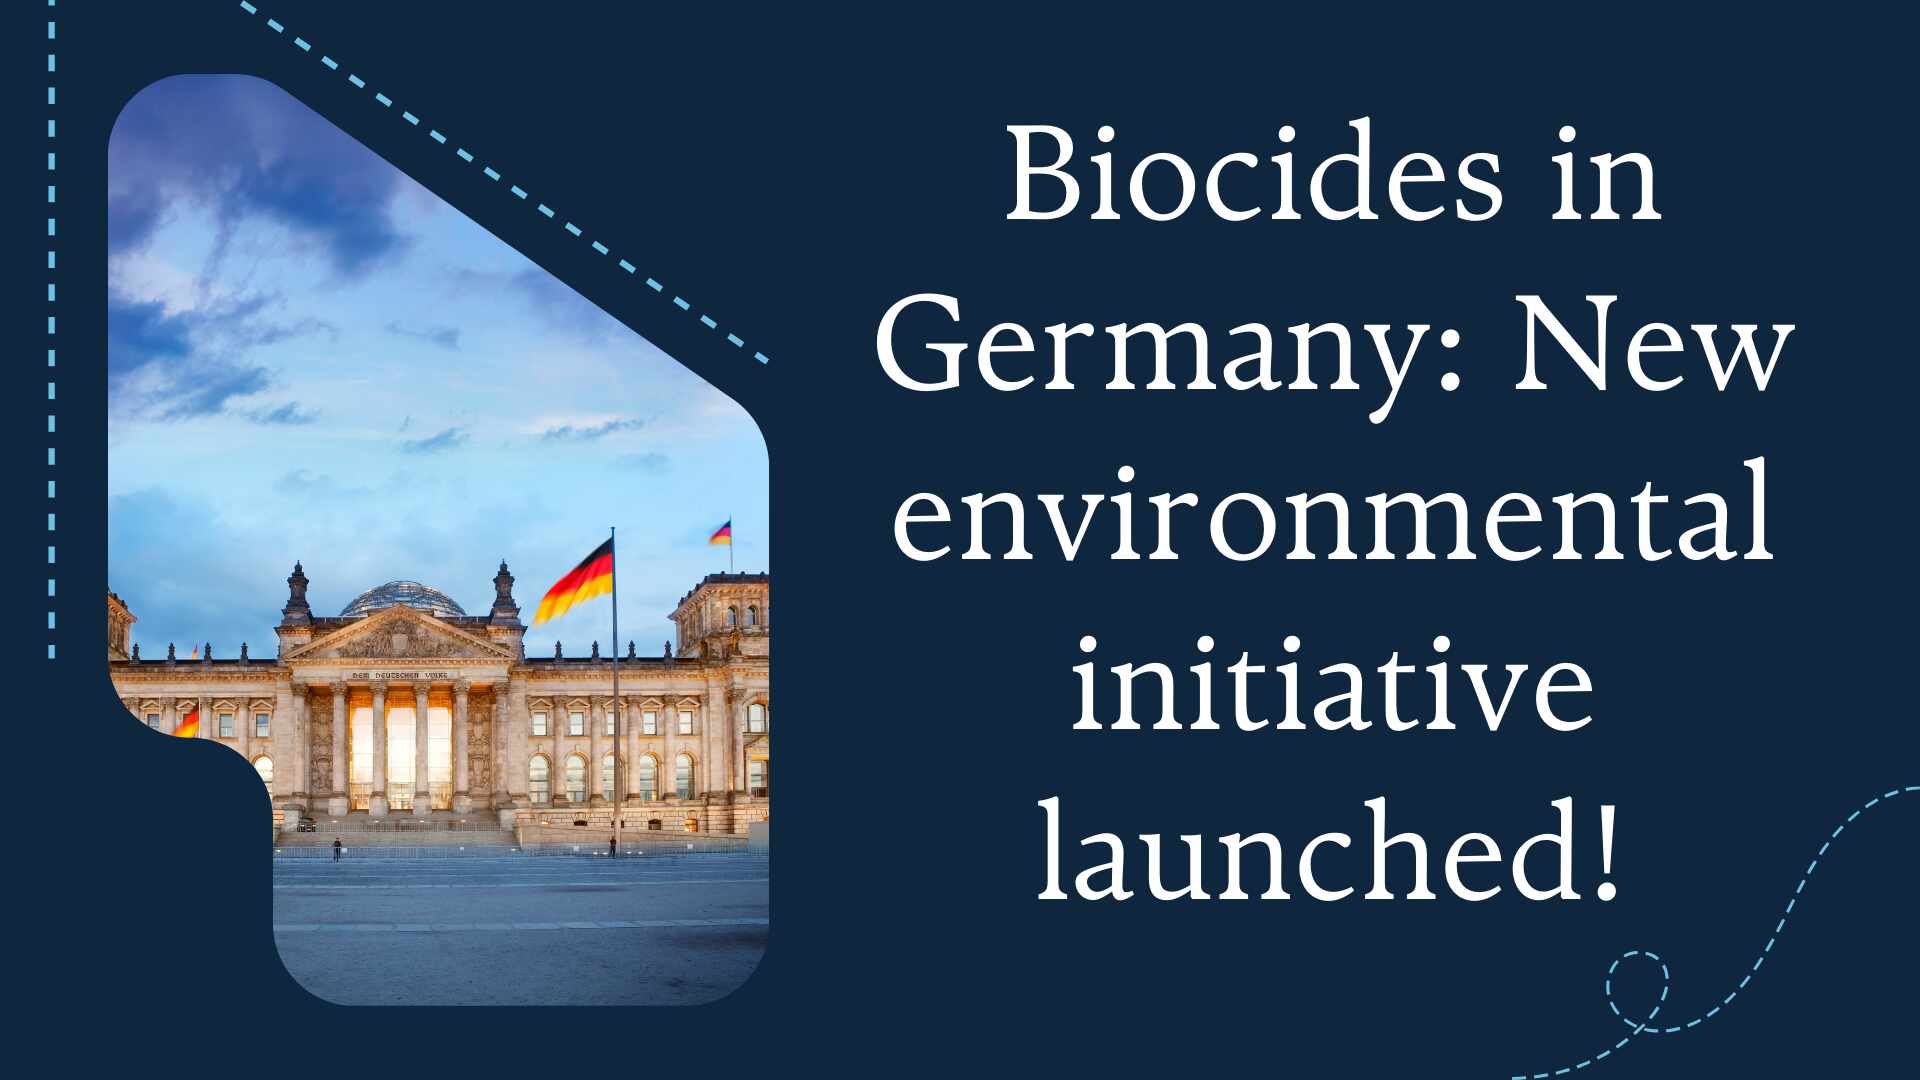 Biocides in Germany New environmental initiative launched